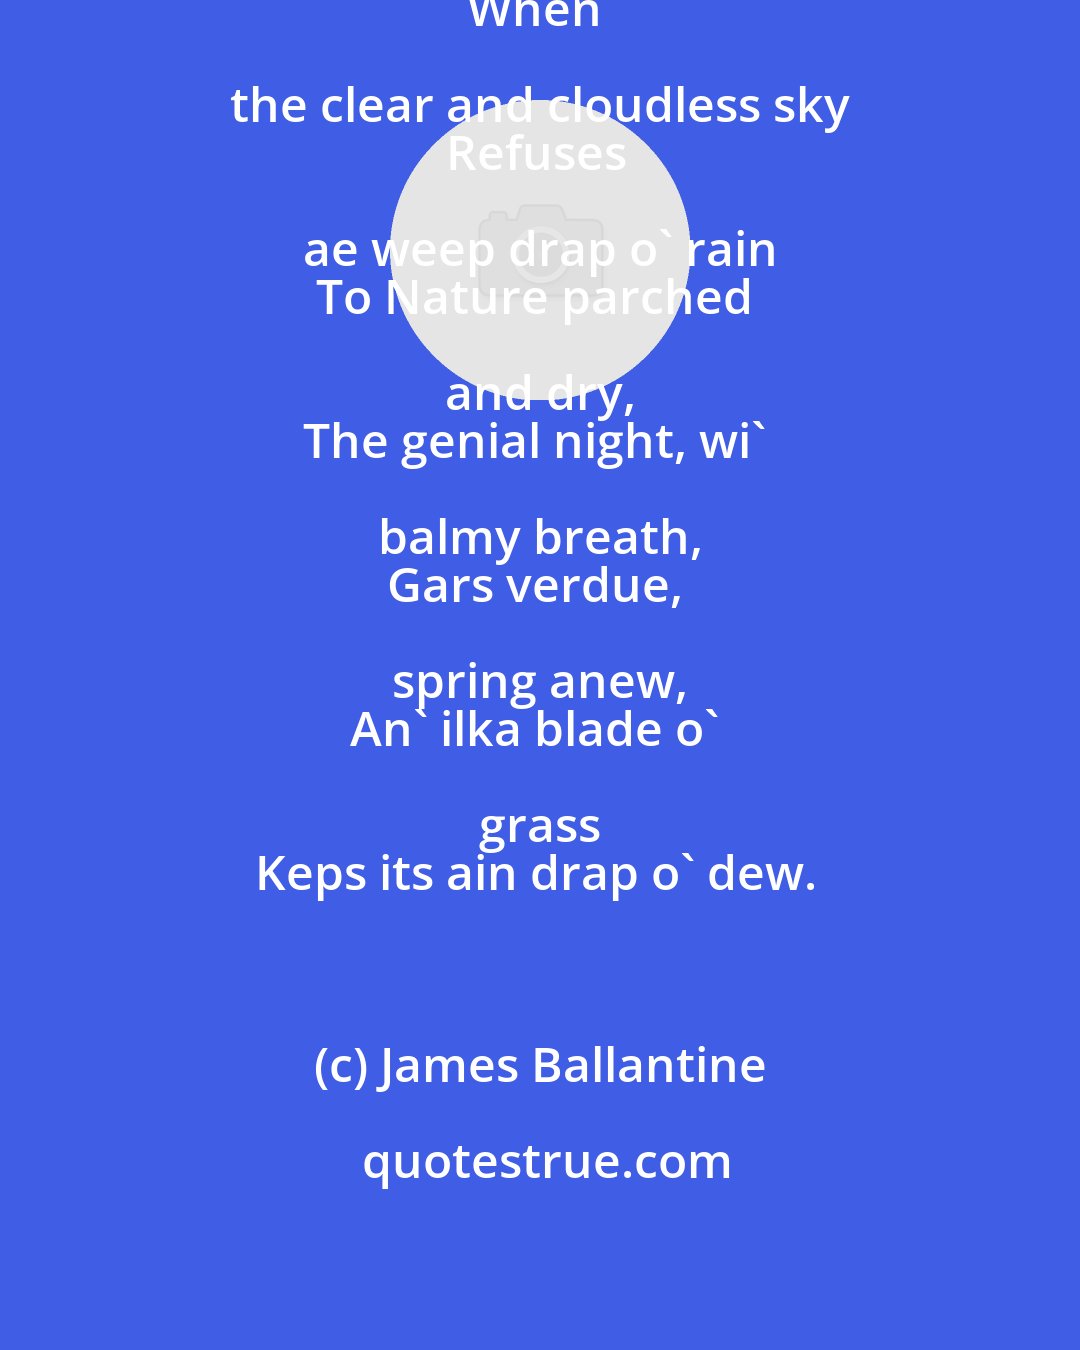 James Ballantine: In lang, lang days o' simmer, 
When the clear and cloudless sky 
Refuses ae weep drap o' rain 
To Nature parched and dry, 
The genial night, wi' balmy breath, 
Gars verdue, spring anew, 
An' ilka blade o' grass 
Keps its ain drap o' dew.